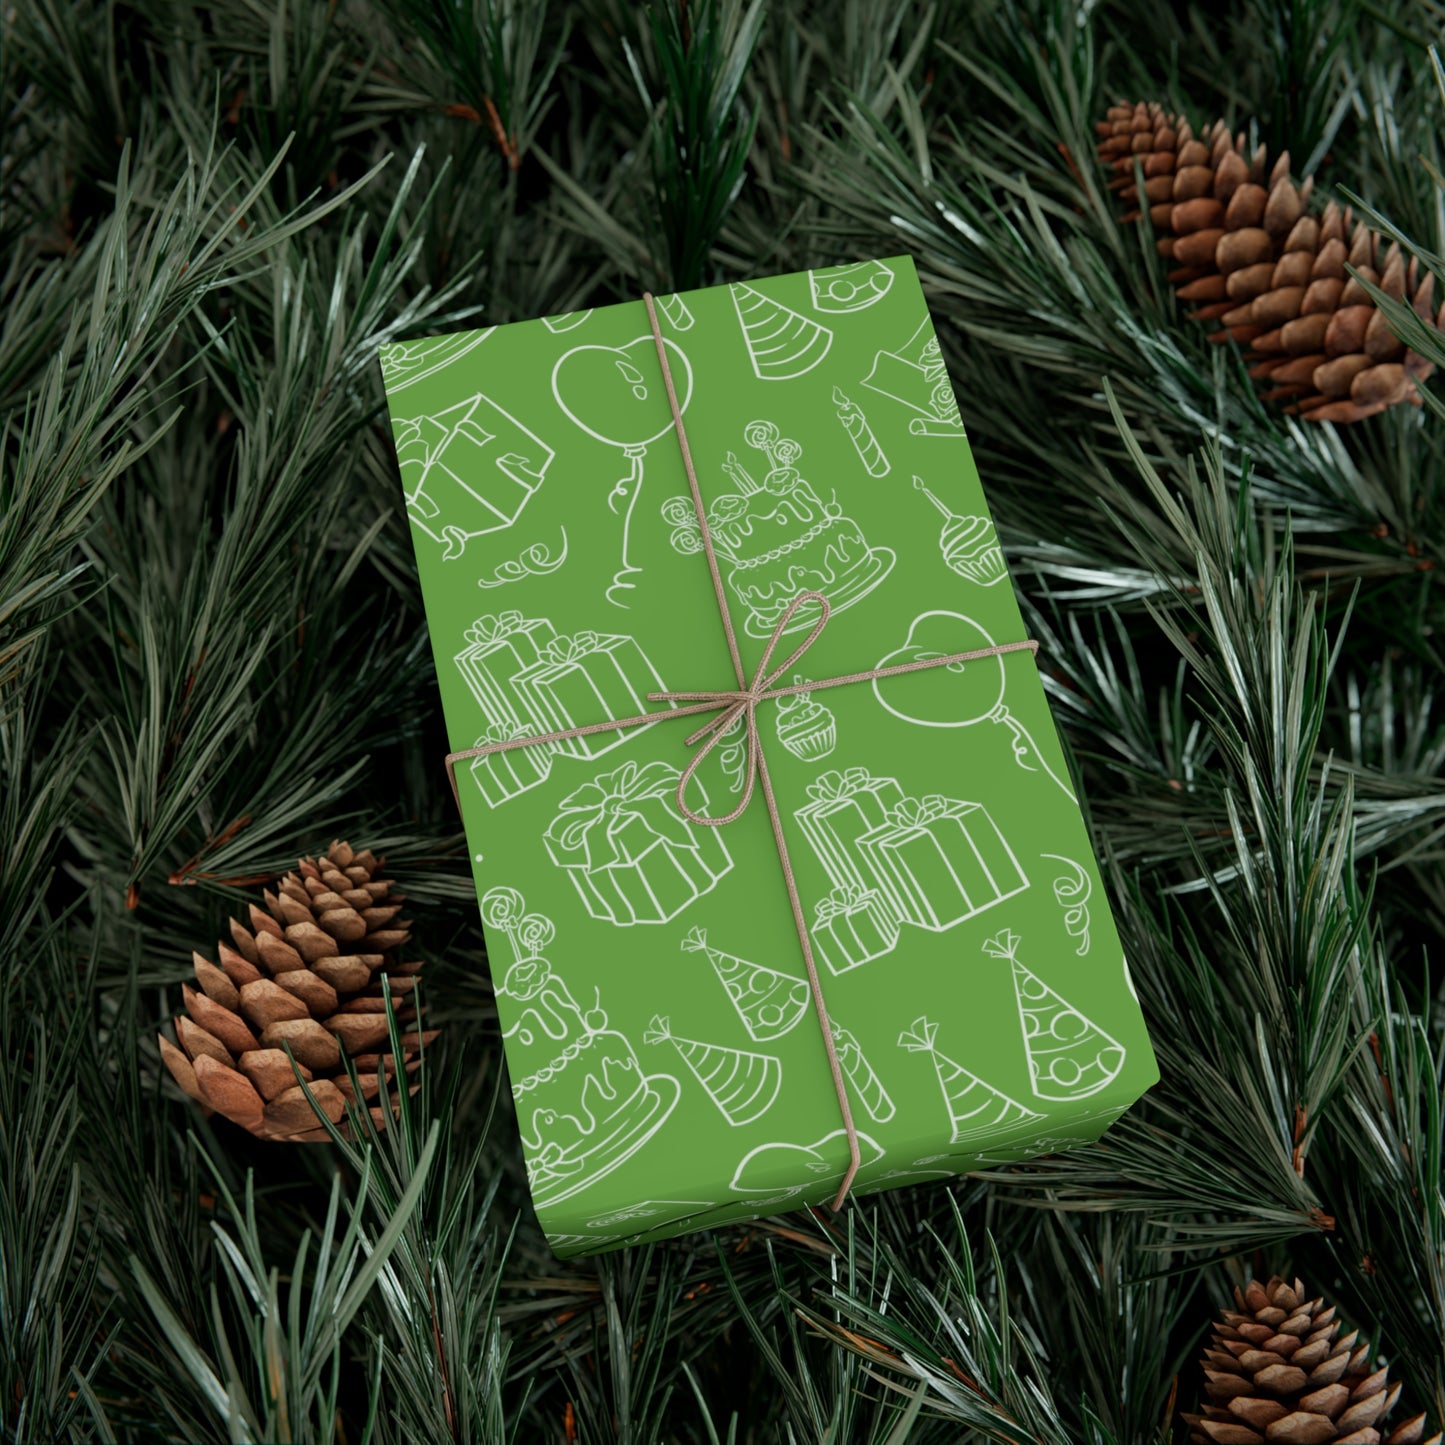 Party Time in Green Gift Wrap Papers